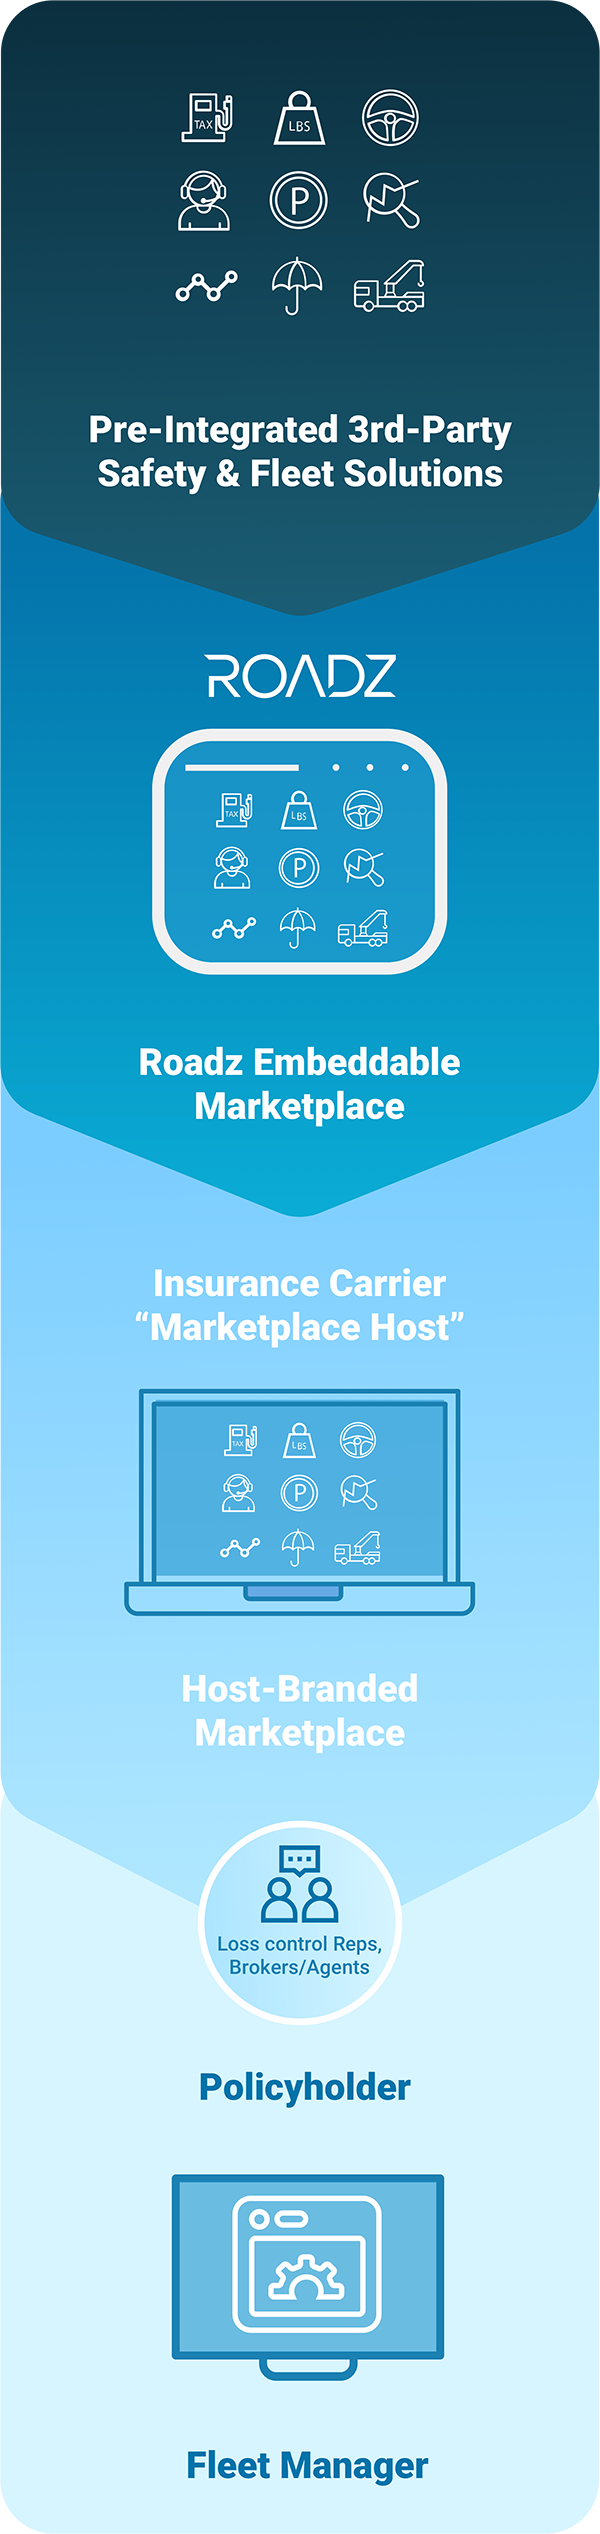 roadz embeddable marketplace vertical graphics